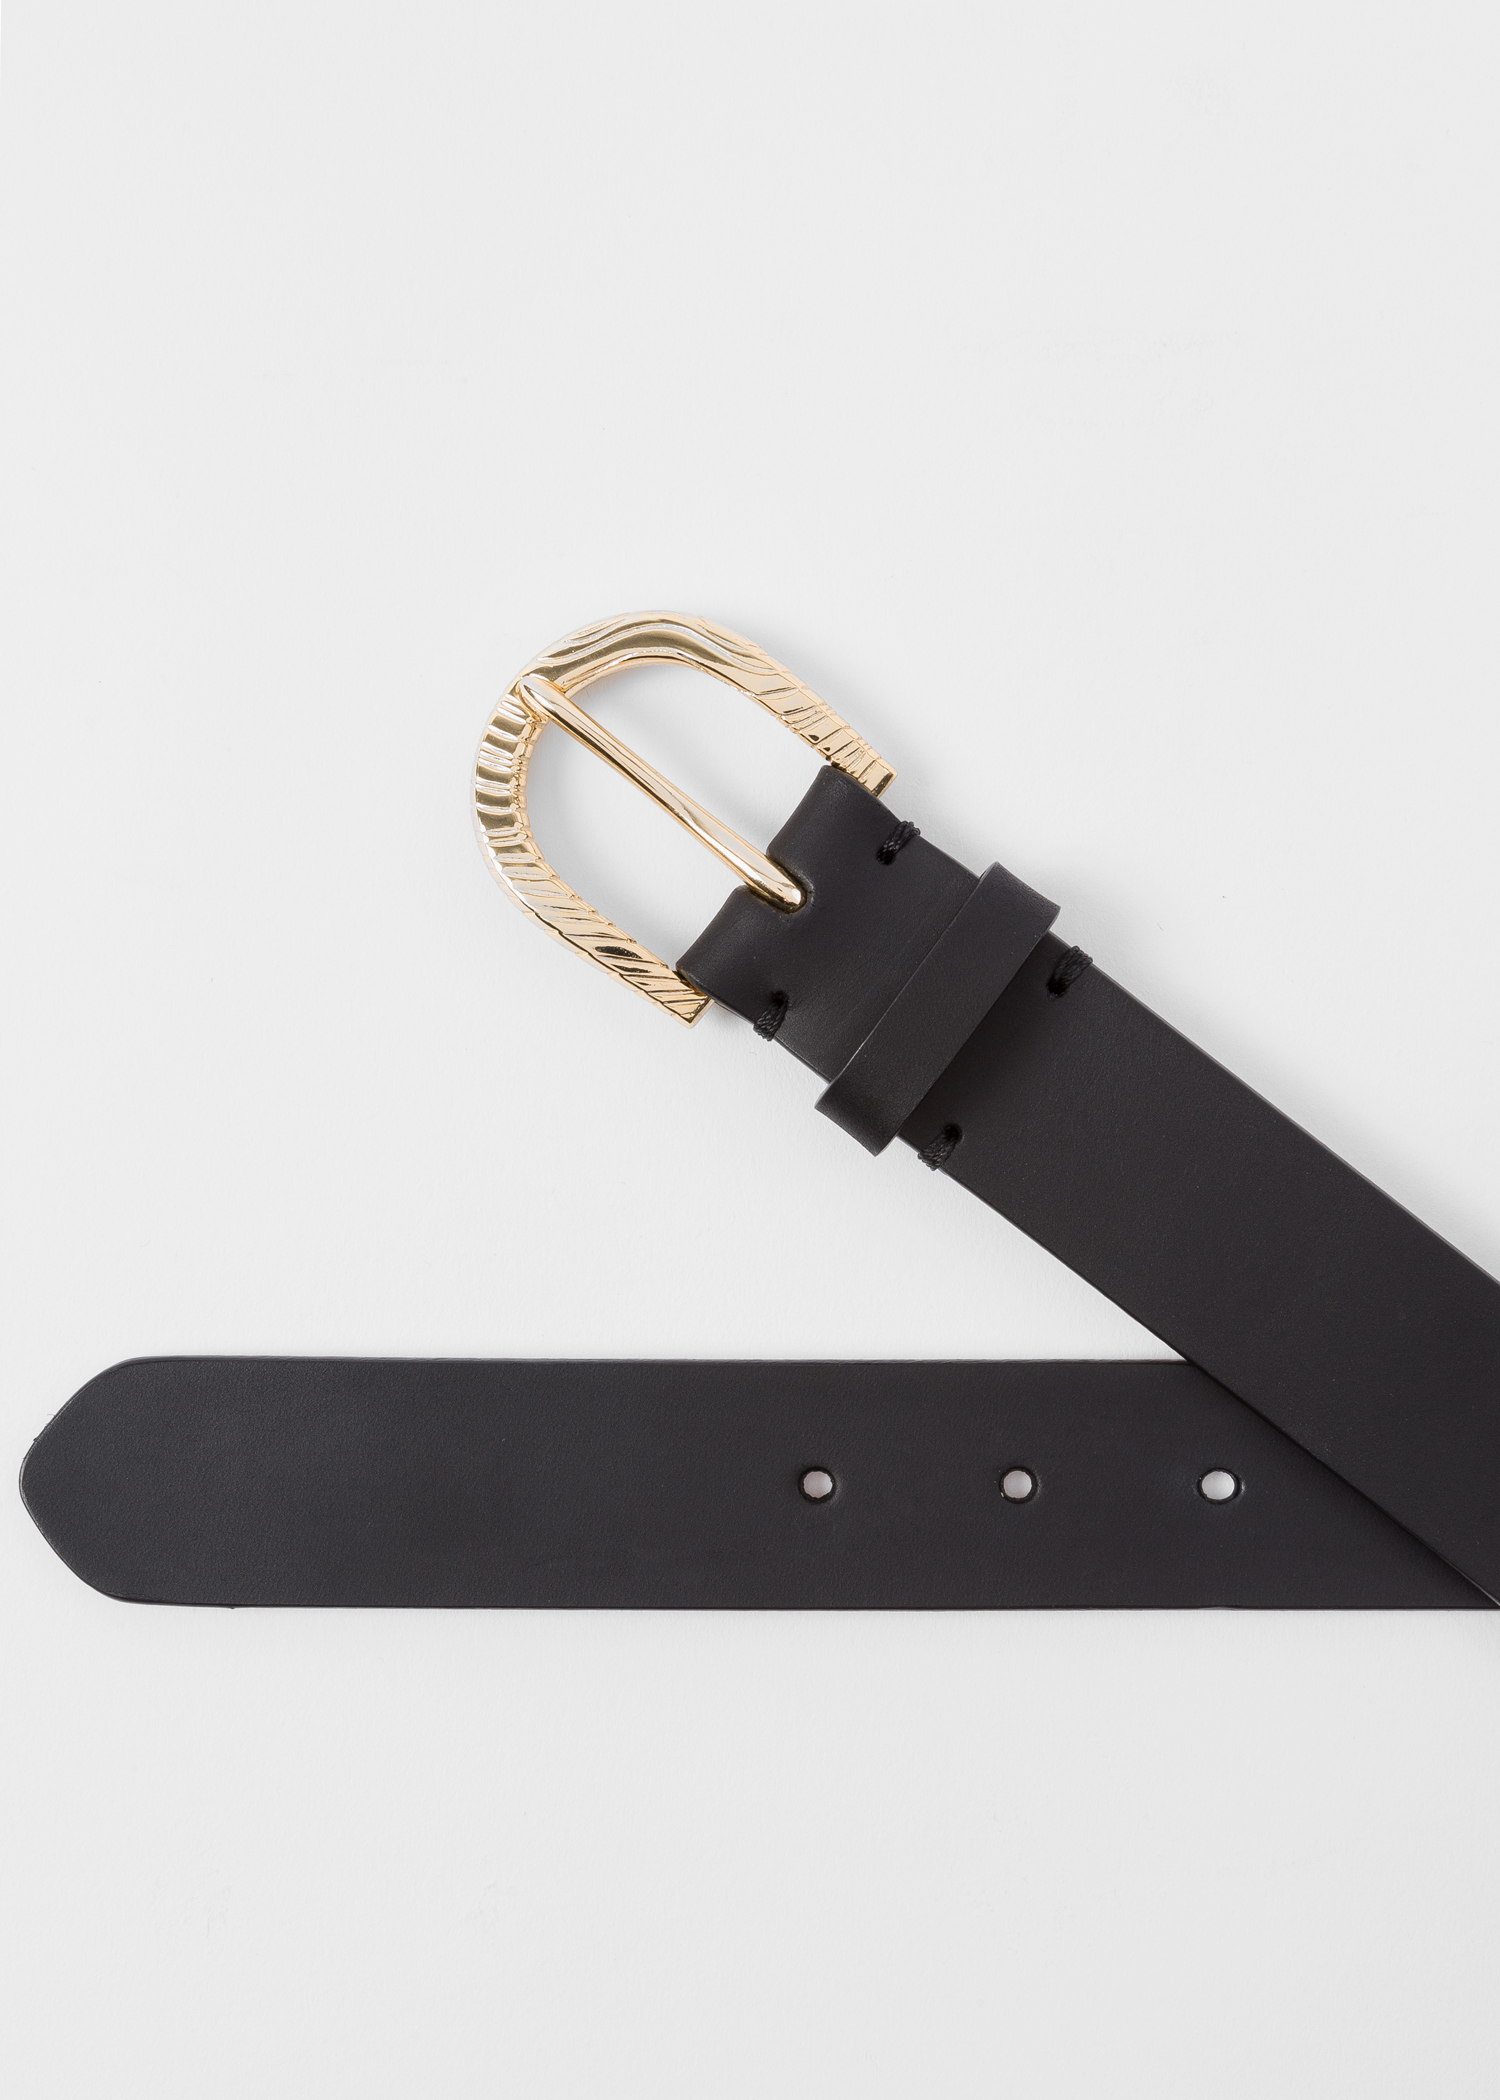 Buckle detail - Women's Black Leather Belt With 'Swirl' Embossed Buckle Paul Smith